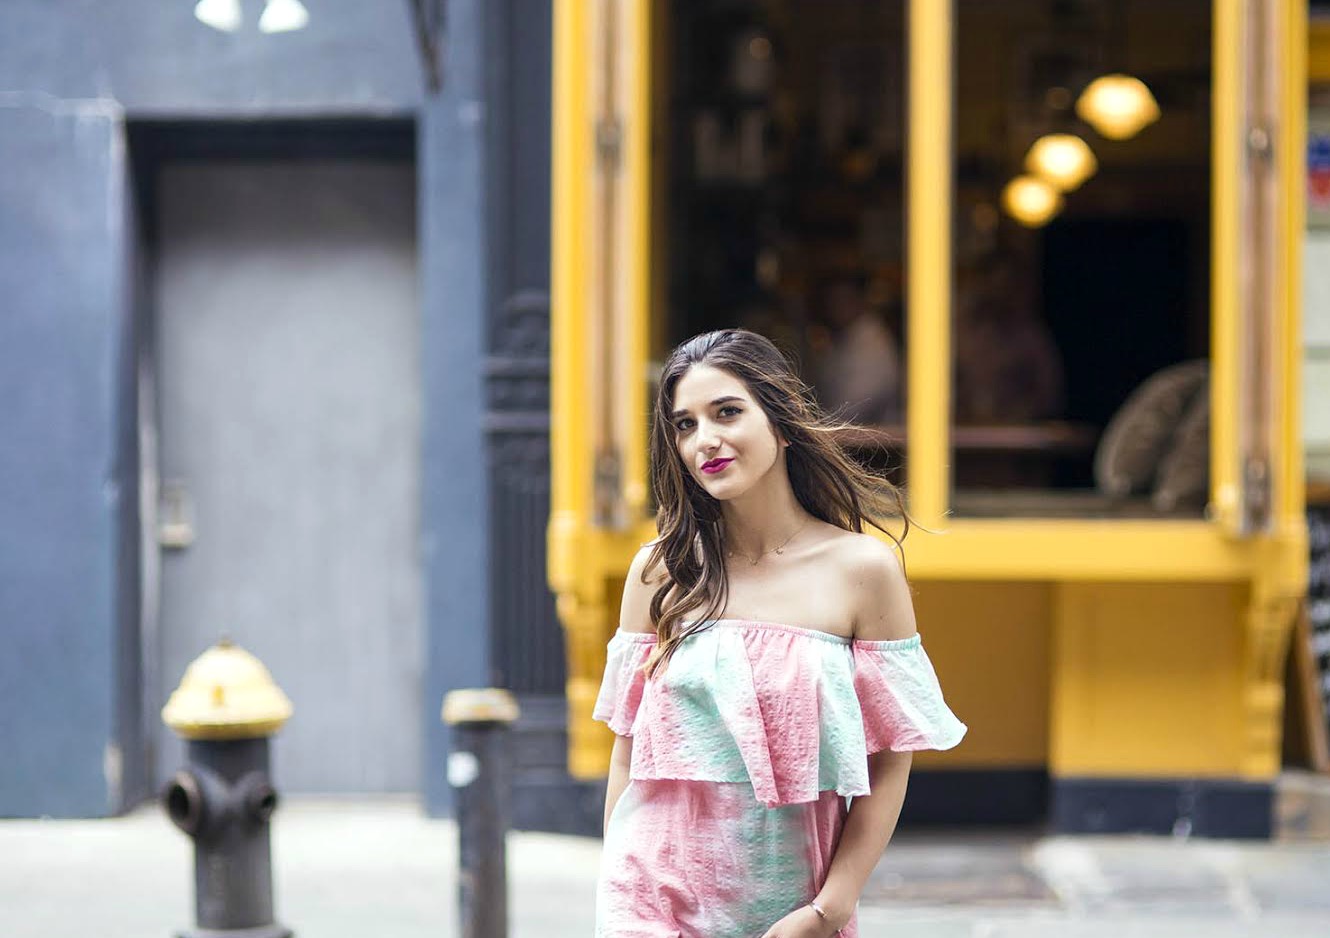 Pastel Tie-Dye Dress Shop Trescool Louboutins & Love Fashion Blog Esther Santer NYC Street Style Blogger Outfit OOTD Trendy Cold Shoulders Blue Black Women Girl Hair Curly Brown Green Pink Red Lip Makeup Lace Up Heels Gray Lady Fashion Bracelet Choker.jpg